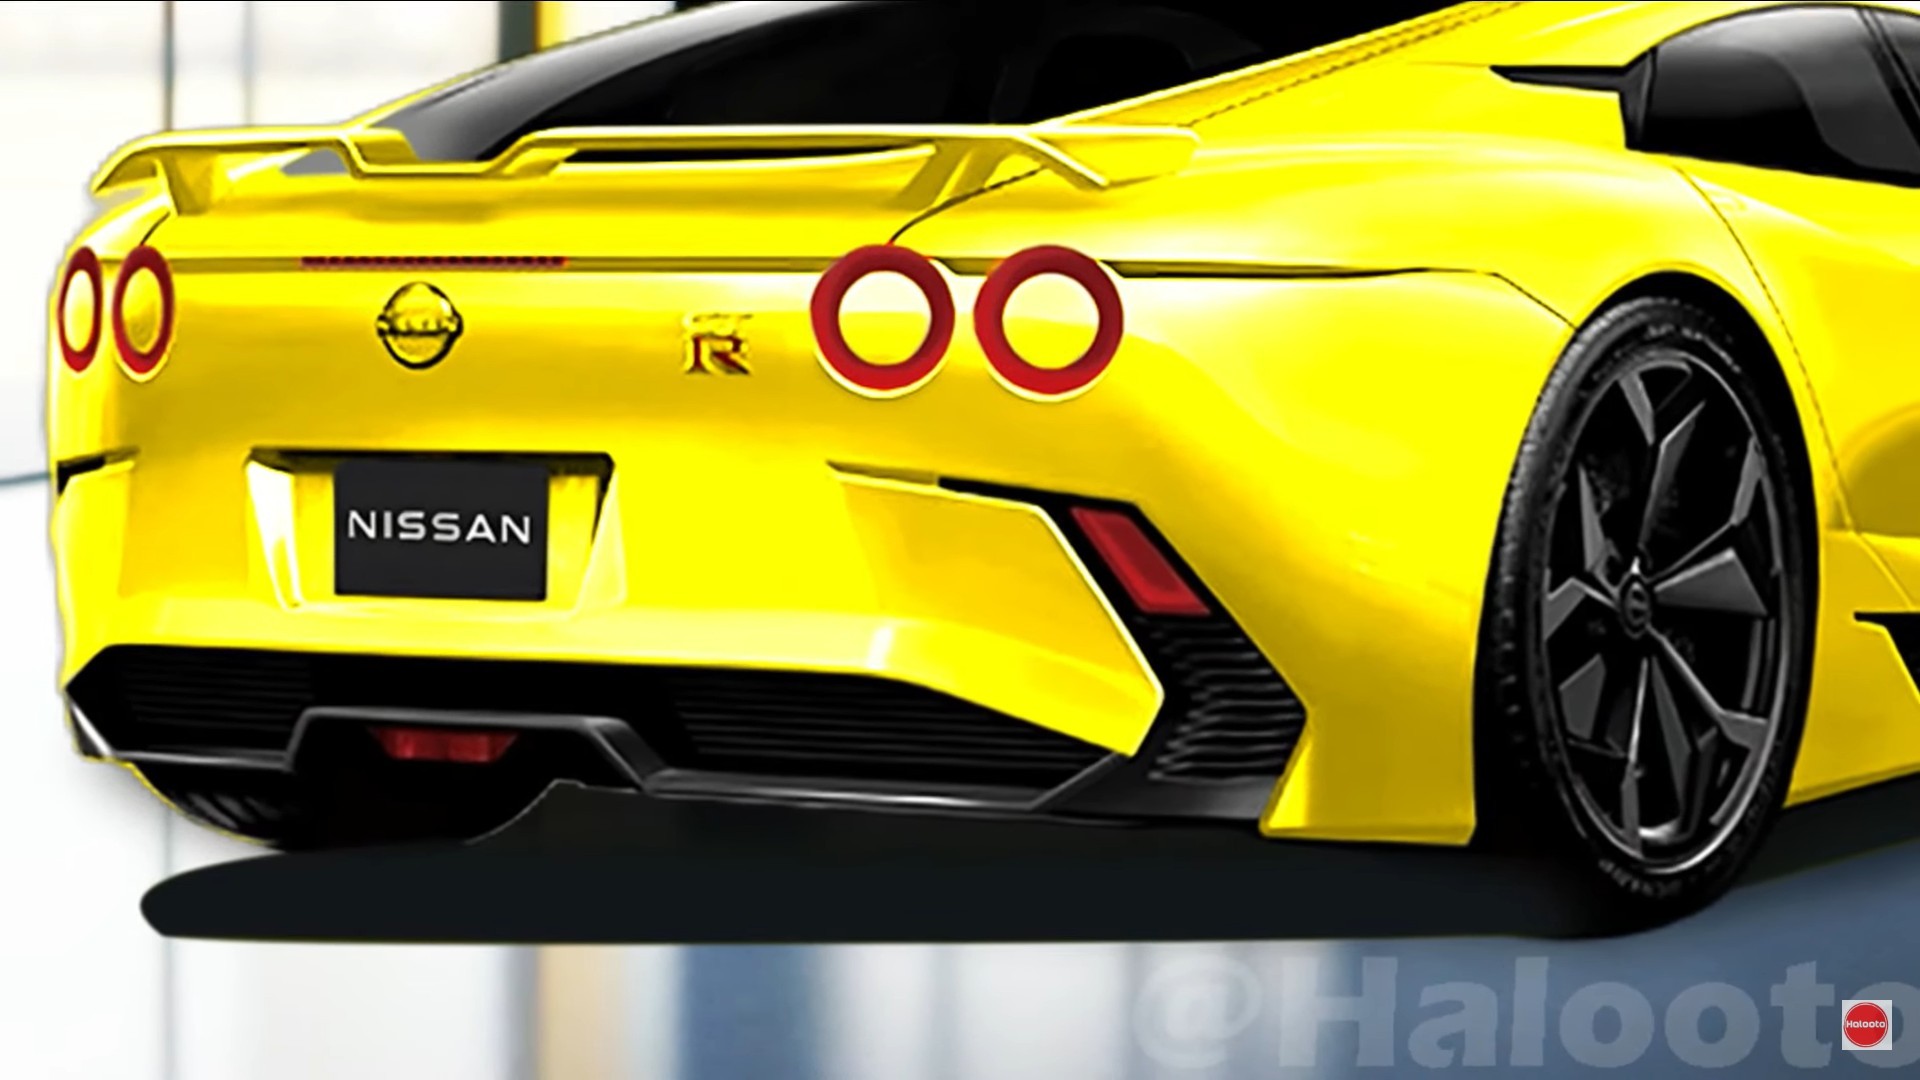 Designer Envisions Futuristic Nissan GT-R R36 Inspired By Jet Fighters